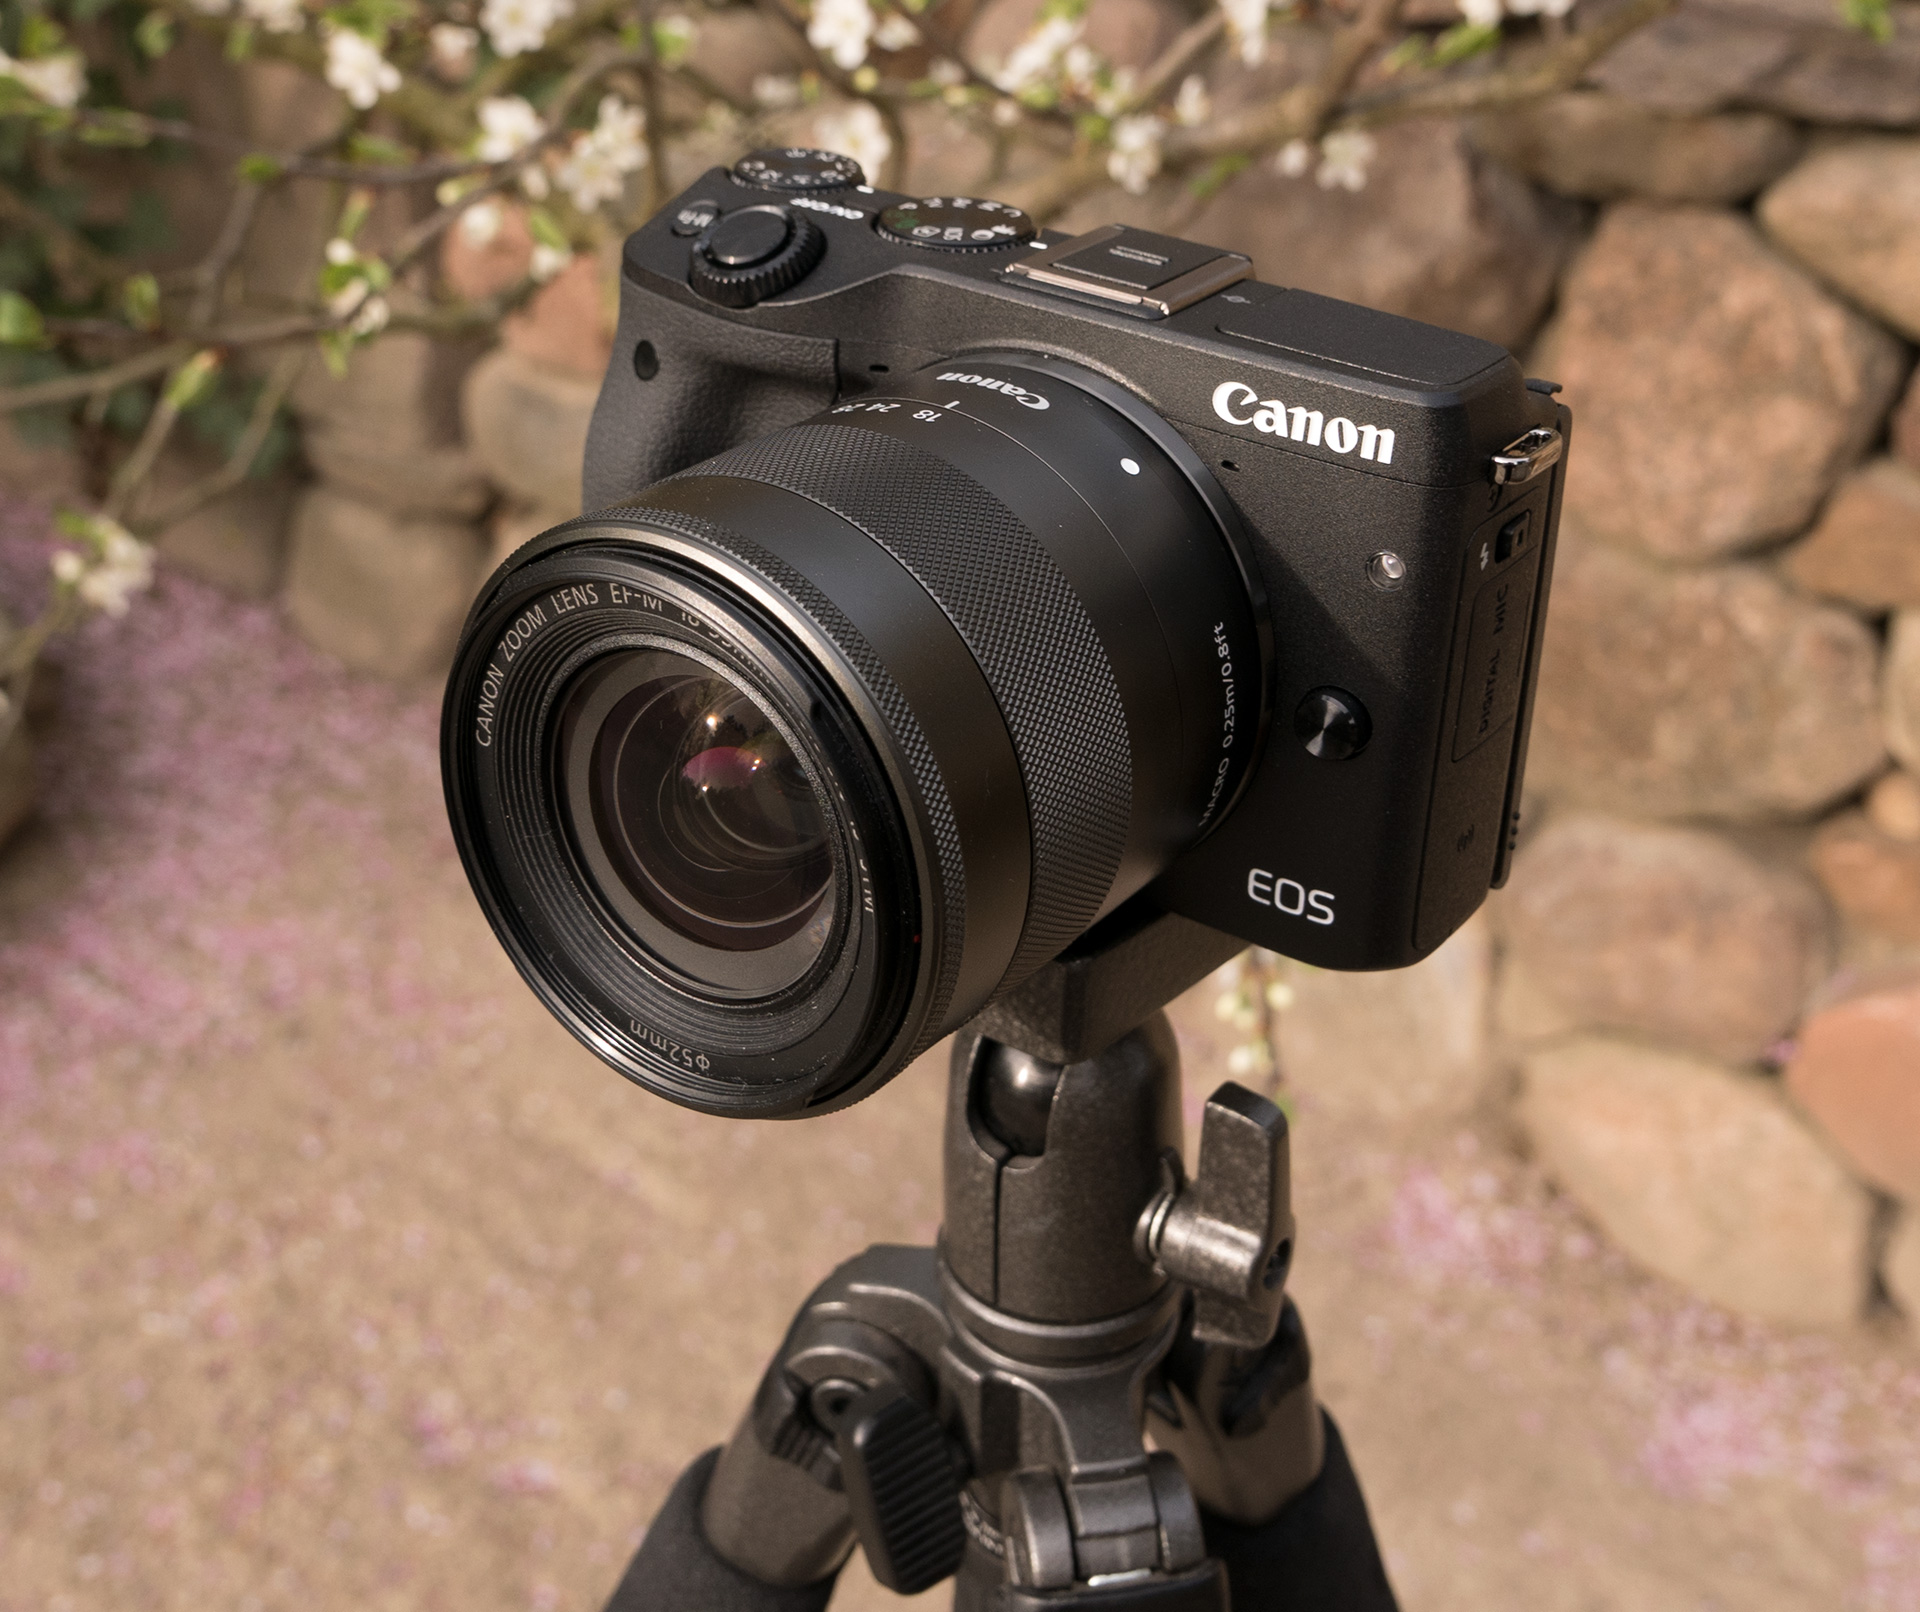 Canon EOS M3 Review - new video quality?